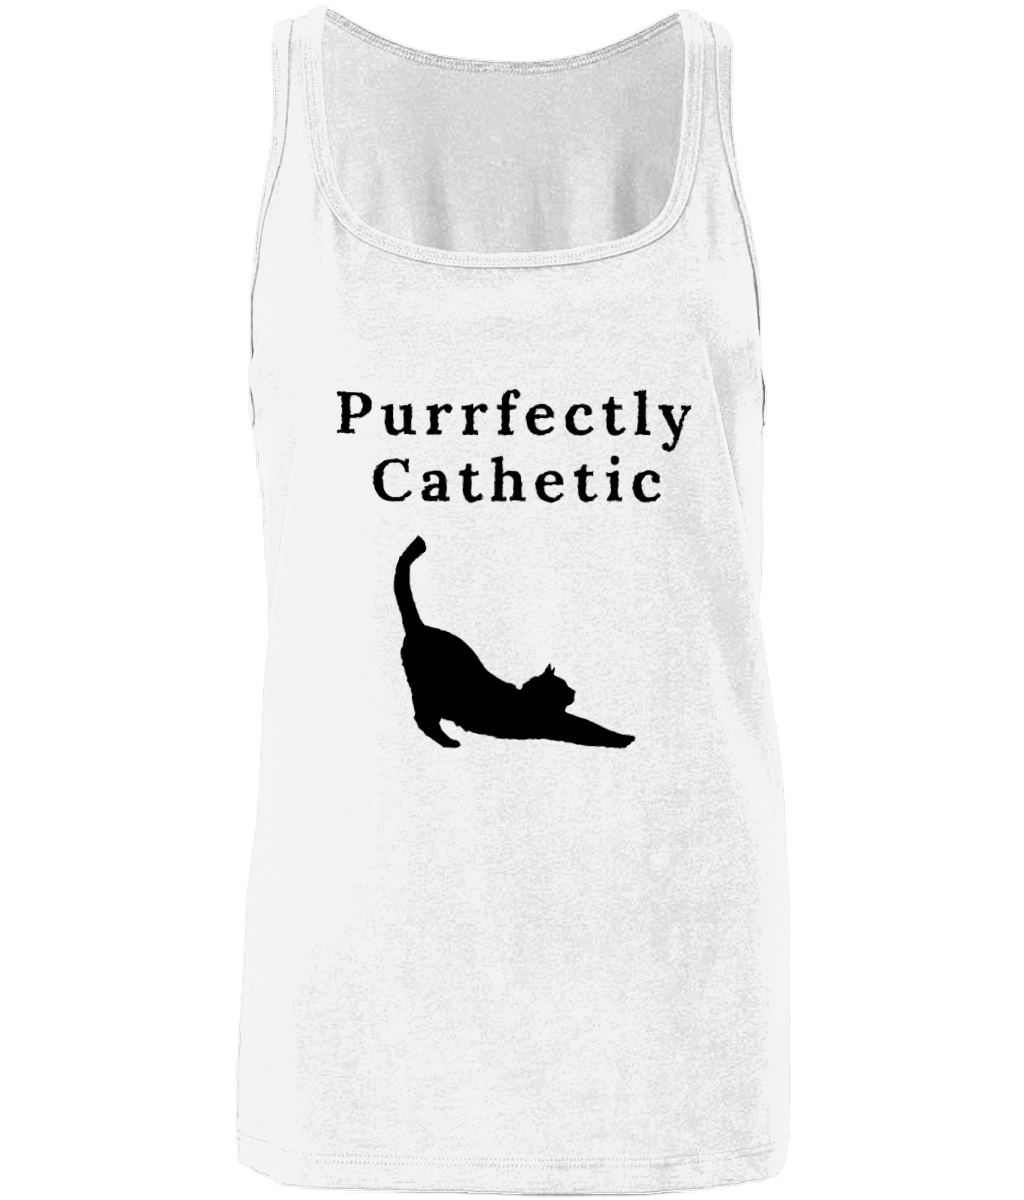 'Purrfectly Cathetic' Tank Top - squishbeans